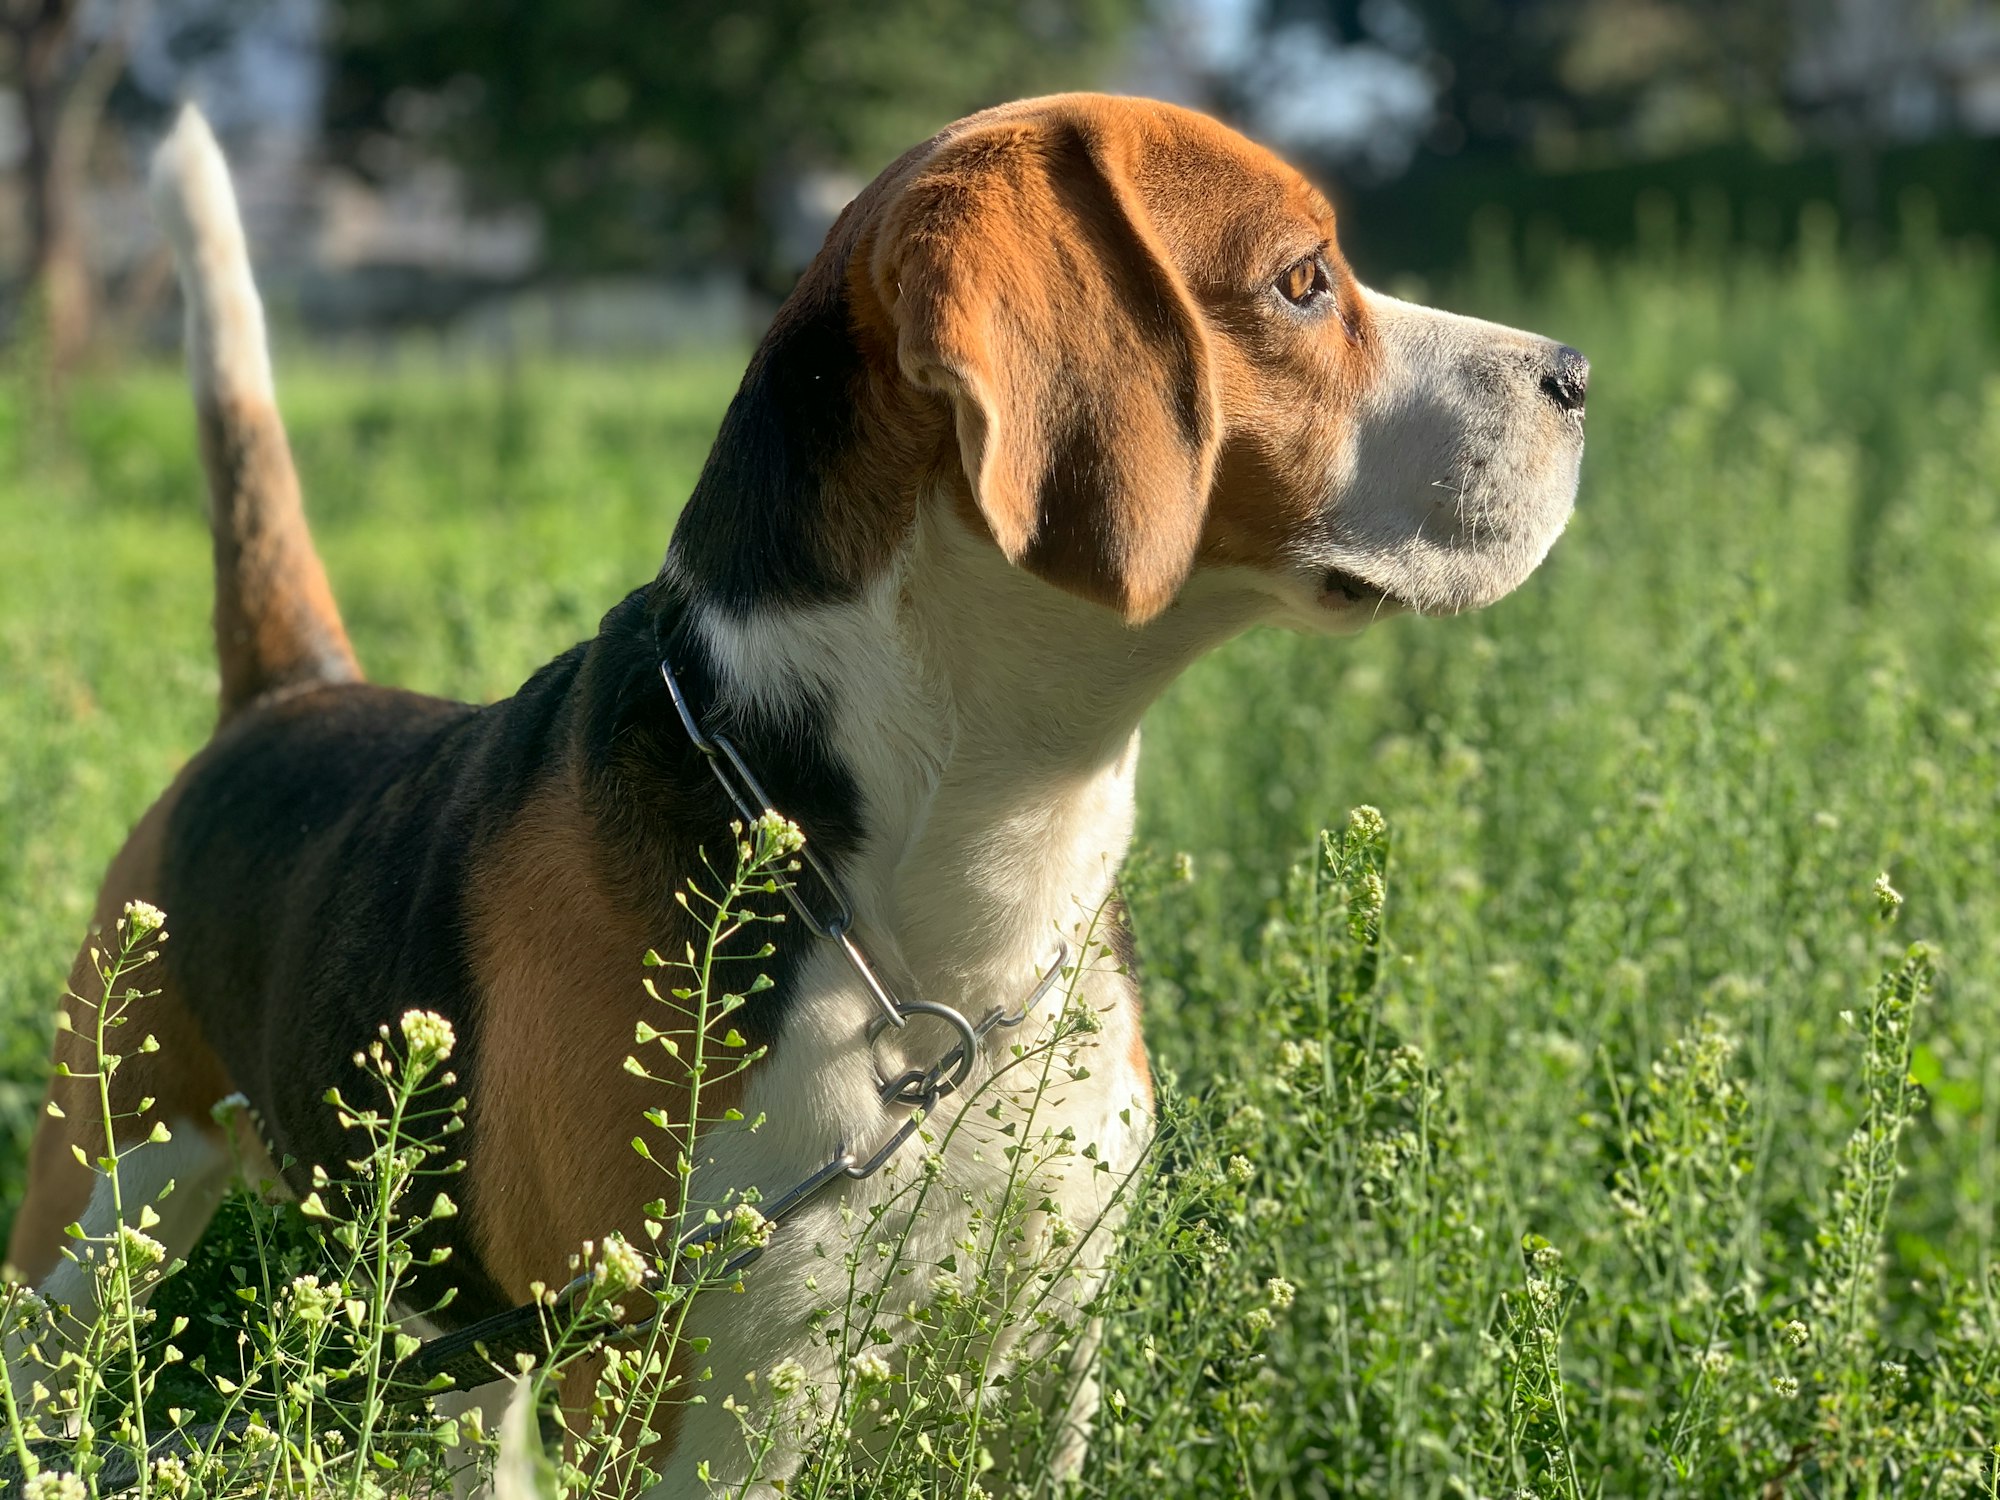 Beagle examined to produce the muscoloskeletal model for 